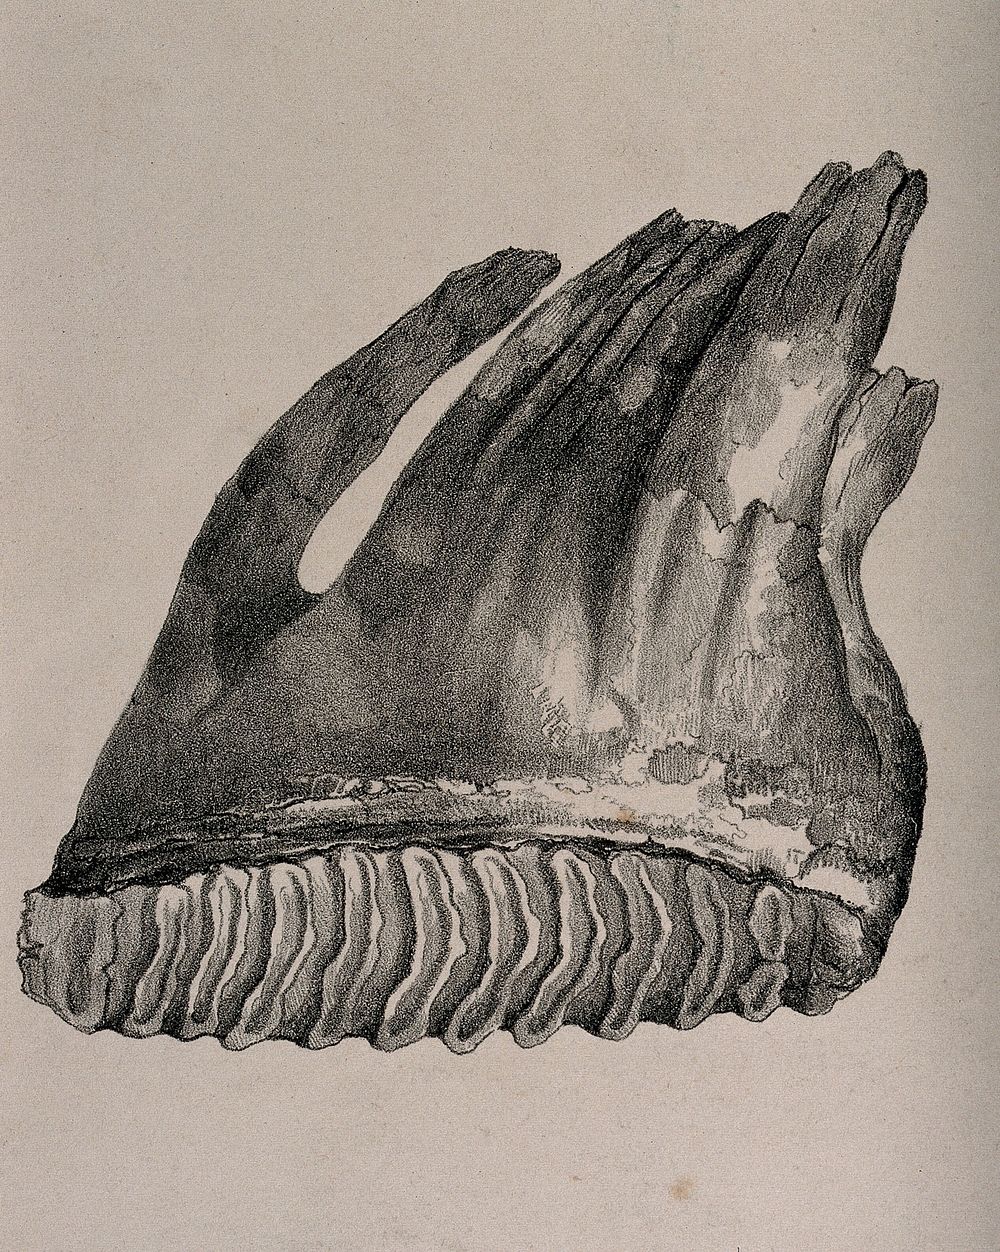 Tooth of an Asian elephant. Lithograph, 1850/1900.